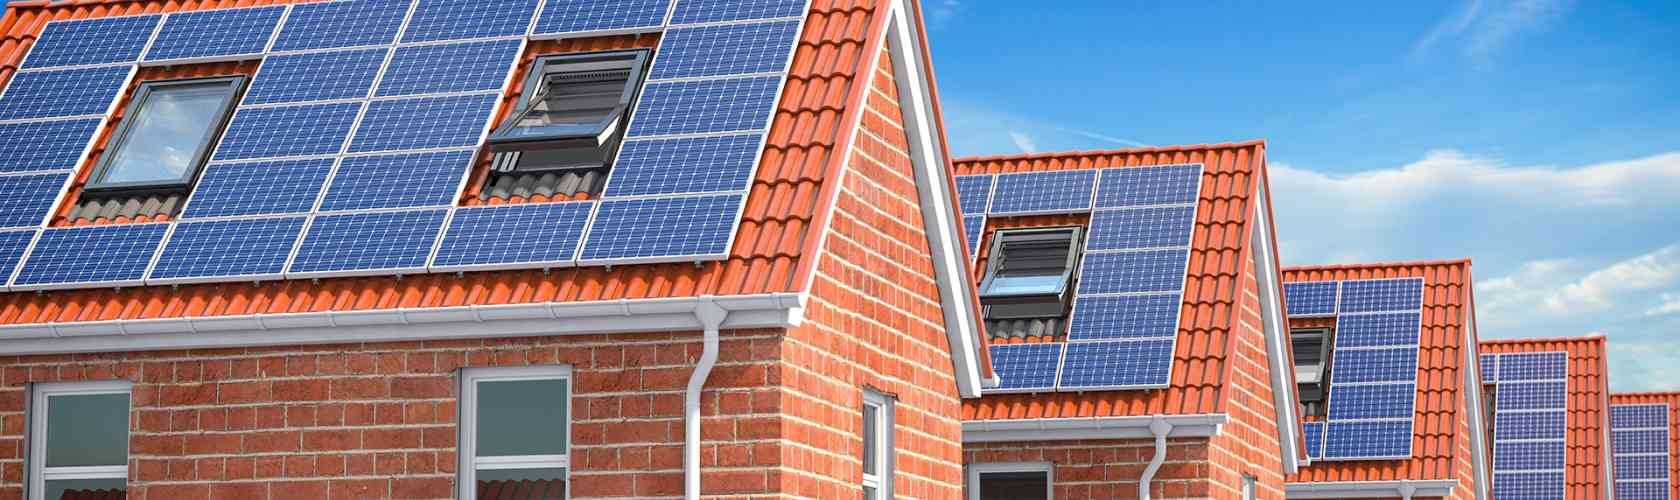 Row of house with solar panels on roof on blue sky AZR29 CK